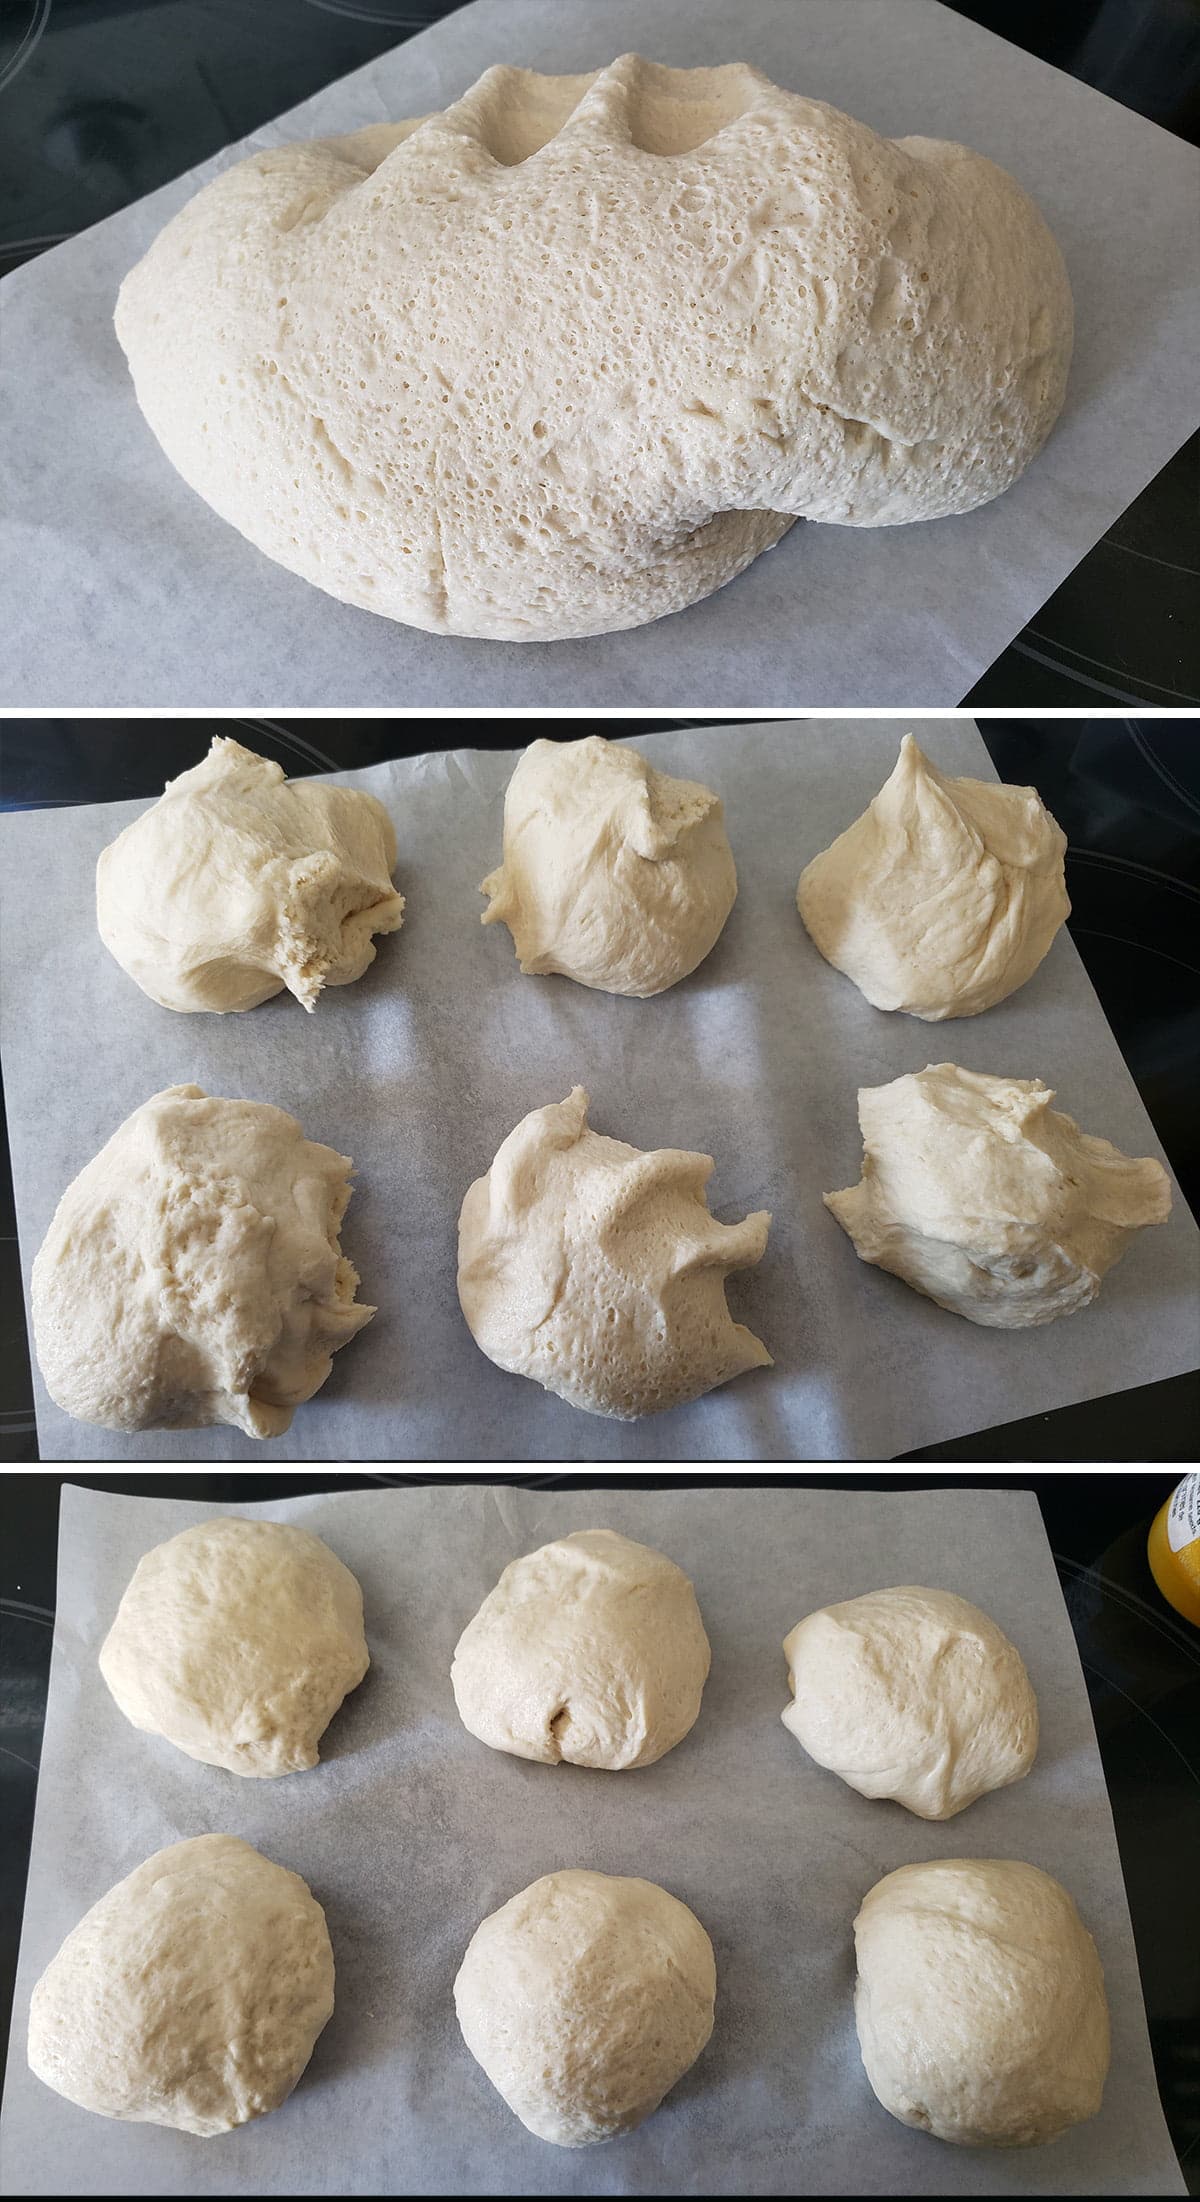 A 3 photo compilation image showing the progression from lump of dough, to dividing it in 6 rough pieces, to those pieces being smoothed and rounded balls of dough.